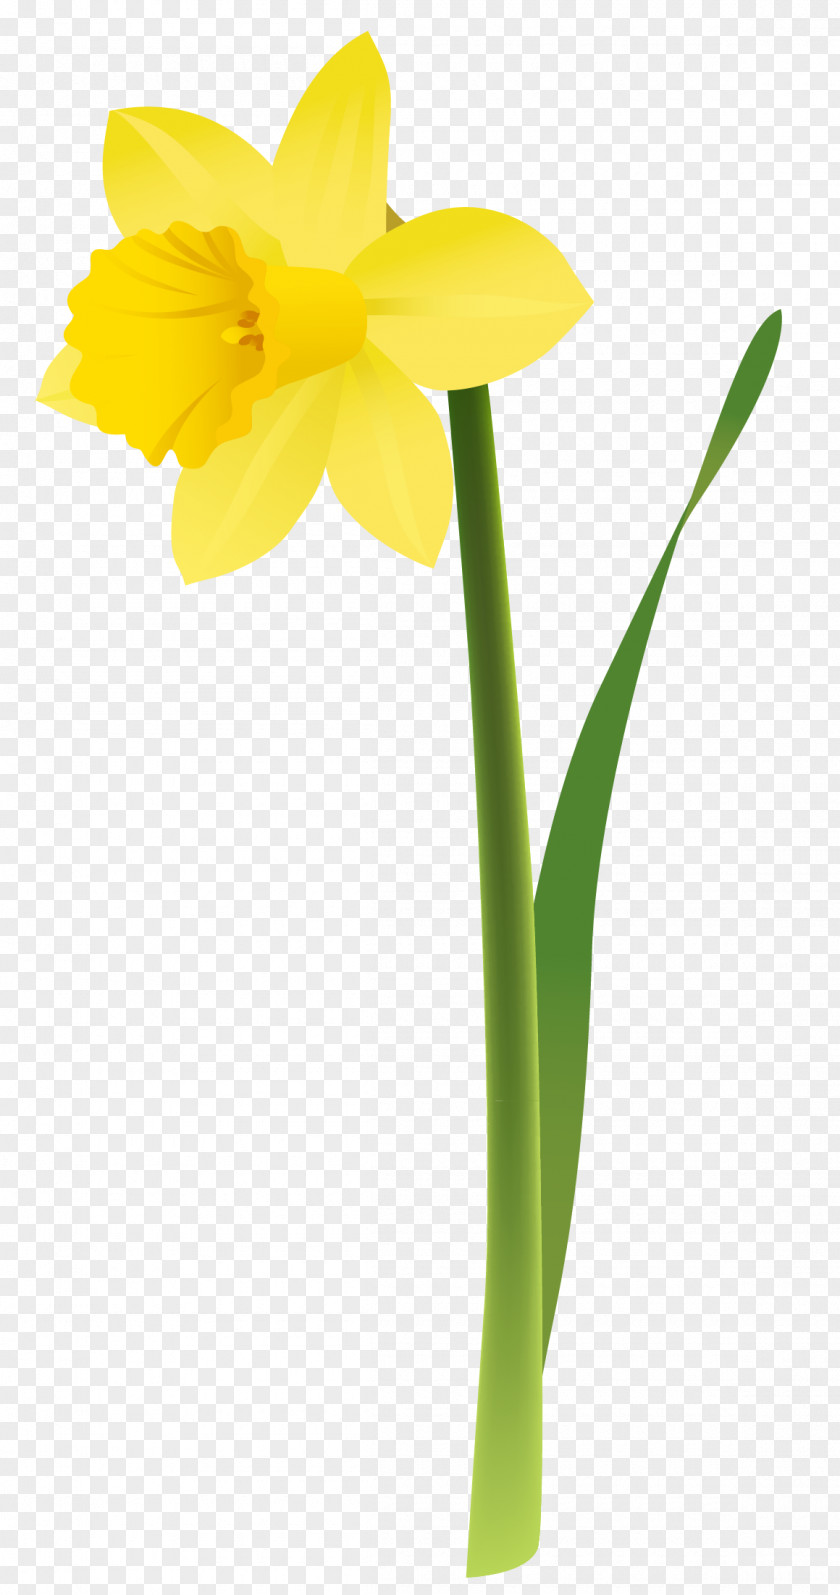 Spring Yellow Daffodil Clipart Floral Design Cut Flowers PNG